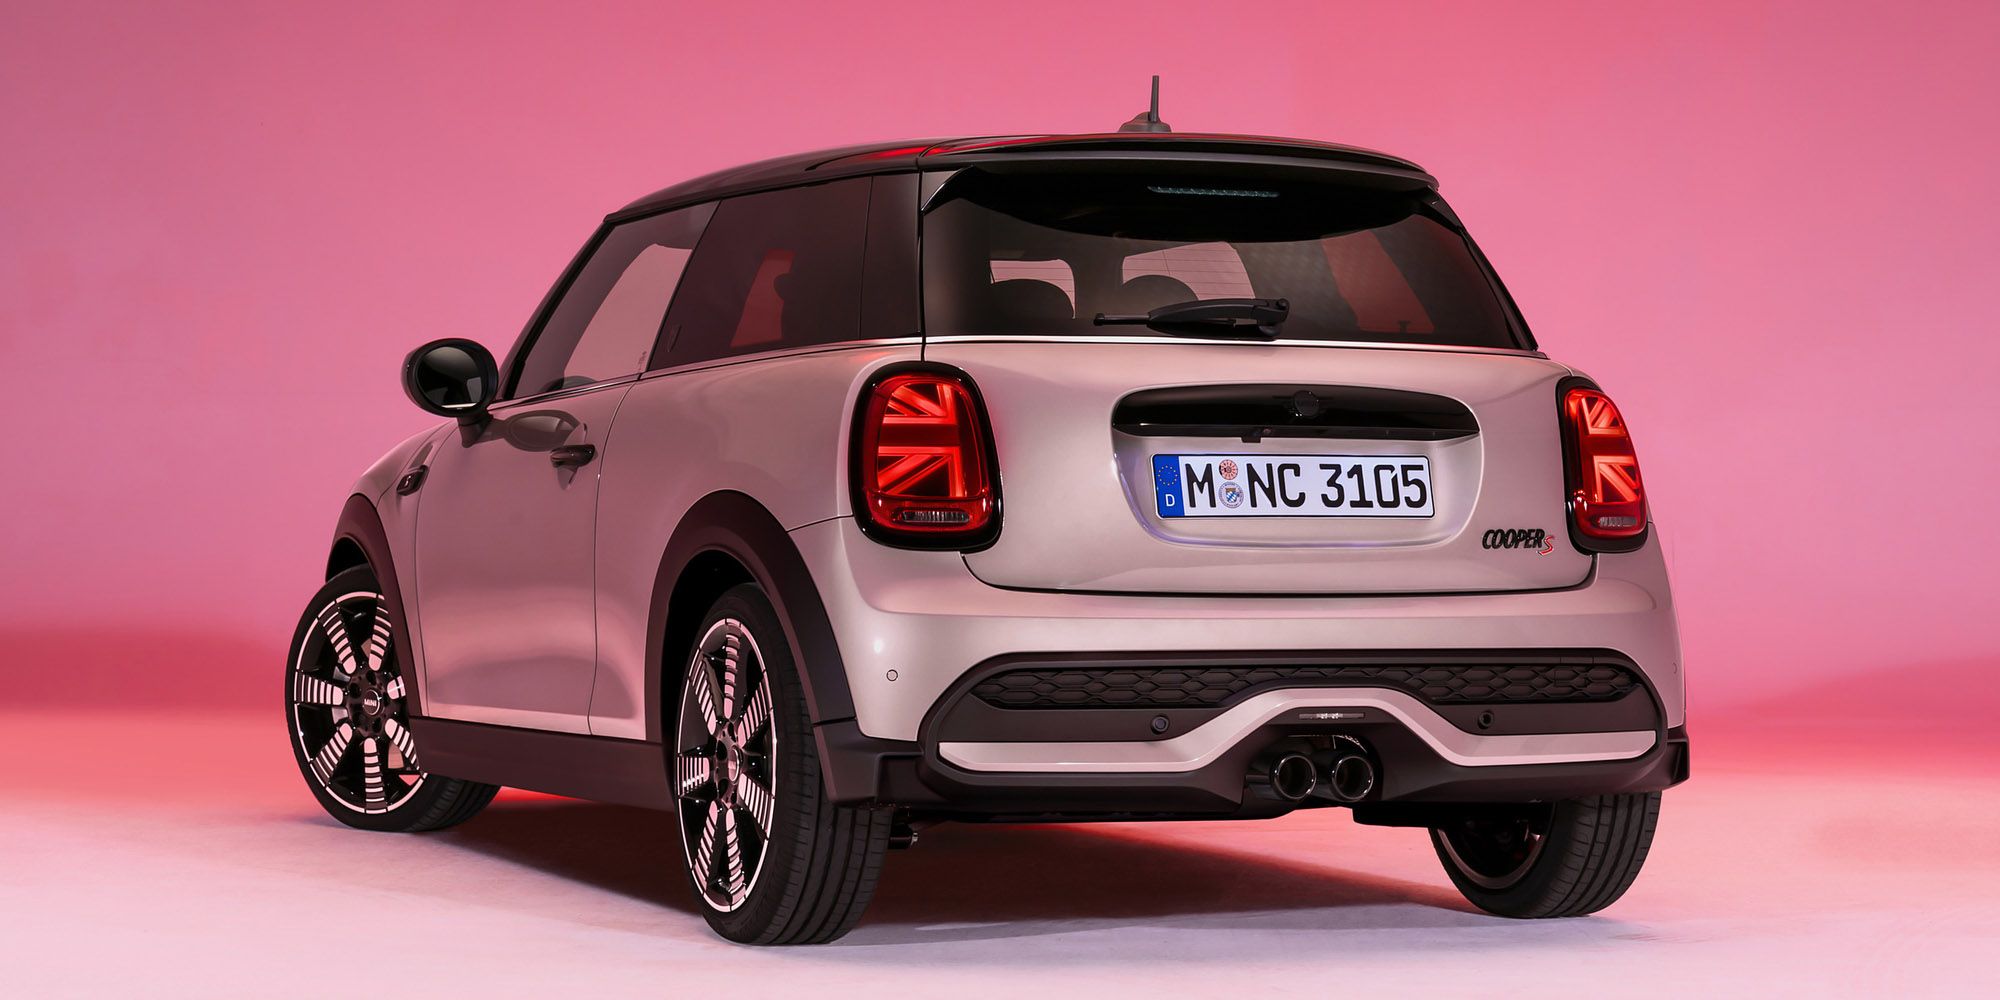 The rear of the facelift Cooper S